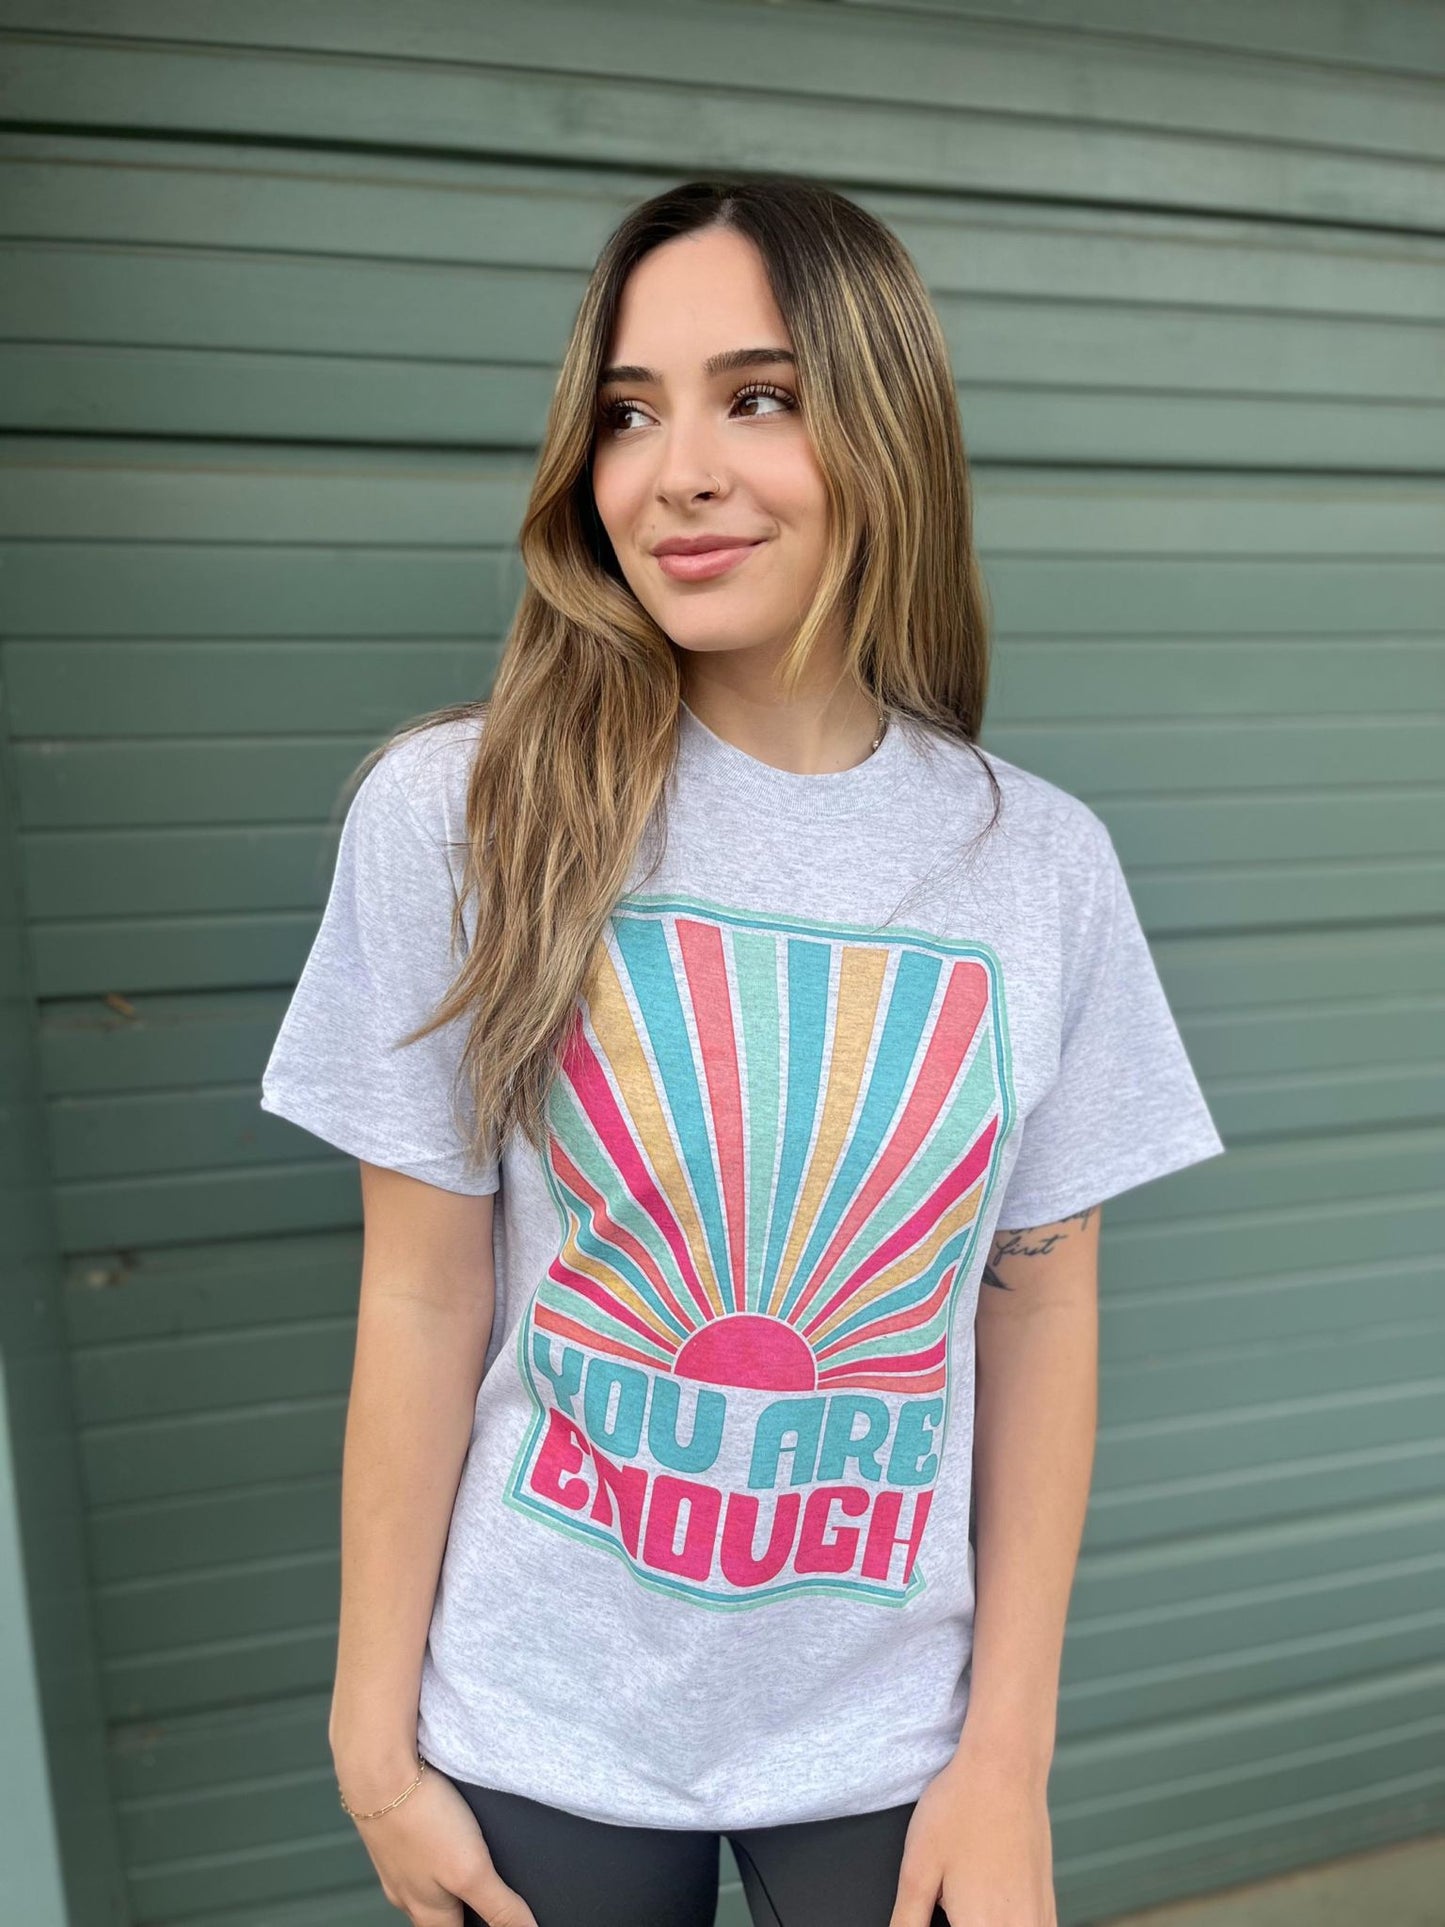 You Are Enough Tee- ASK Apparel LLC